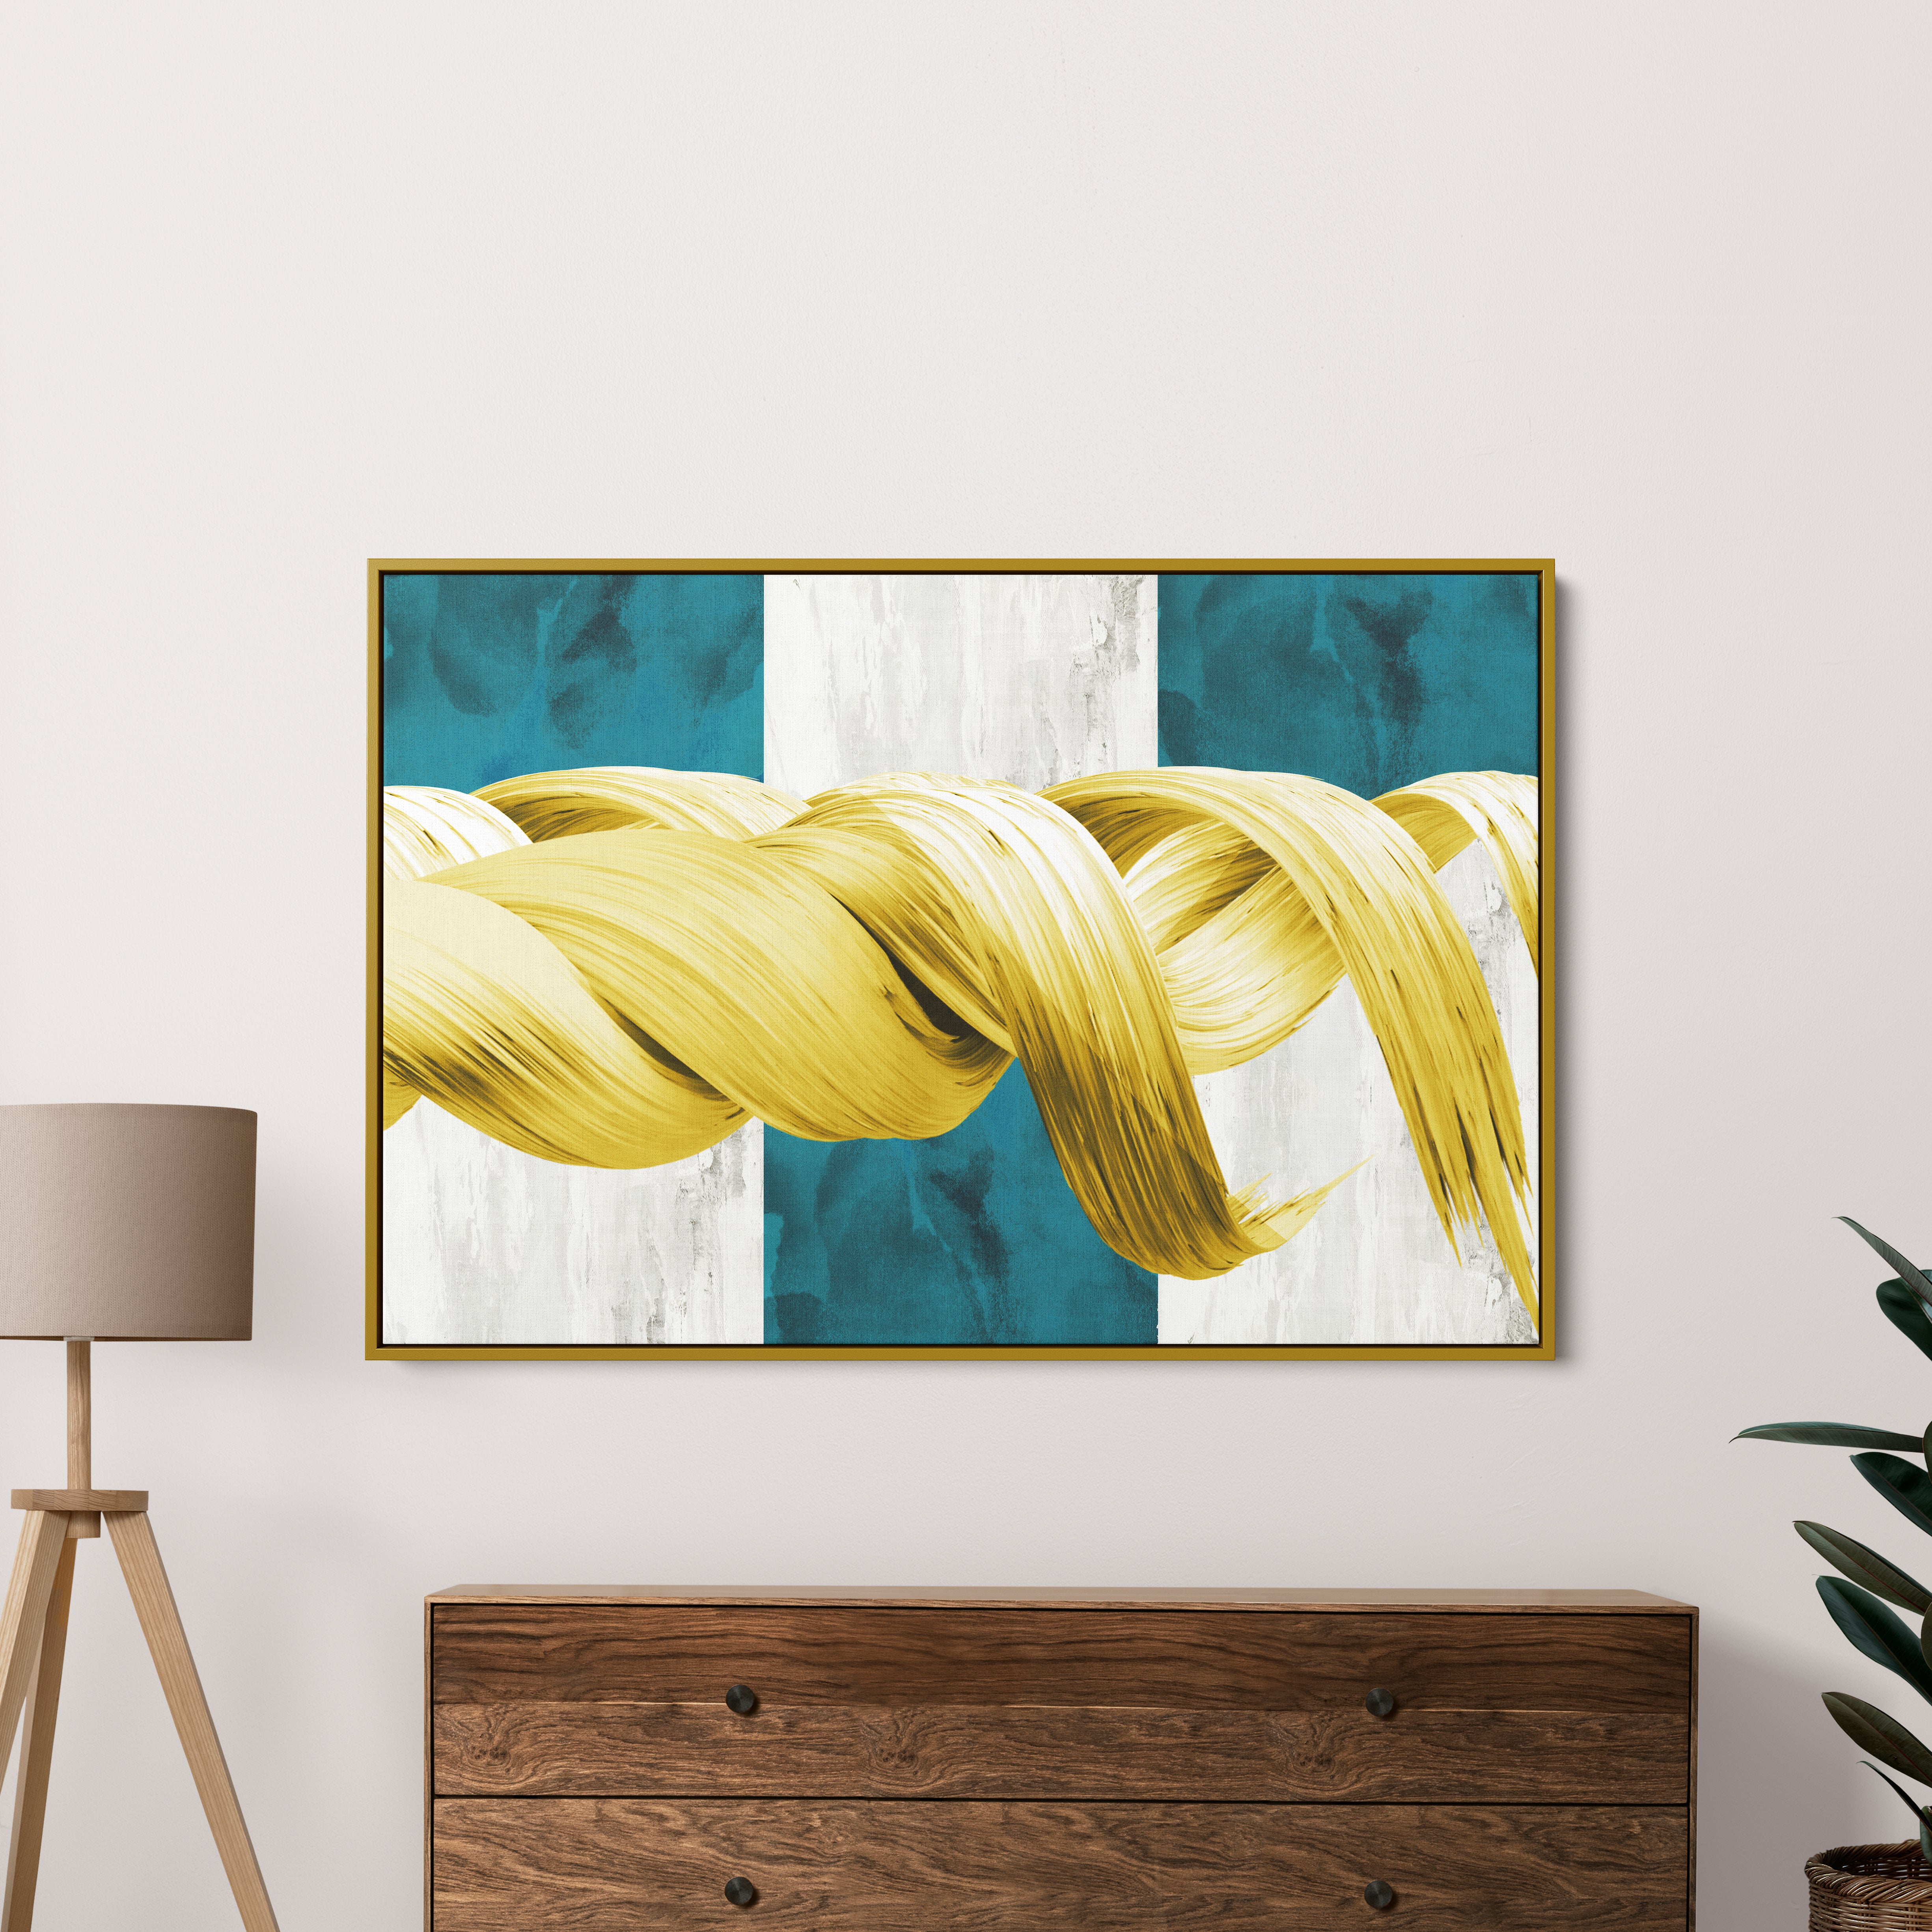 Abstract Golden And Green Mordern Art Canvas Wall Painting